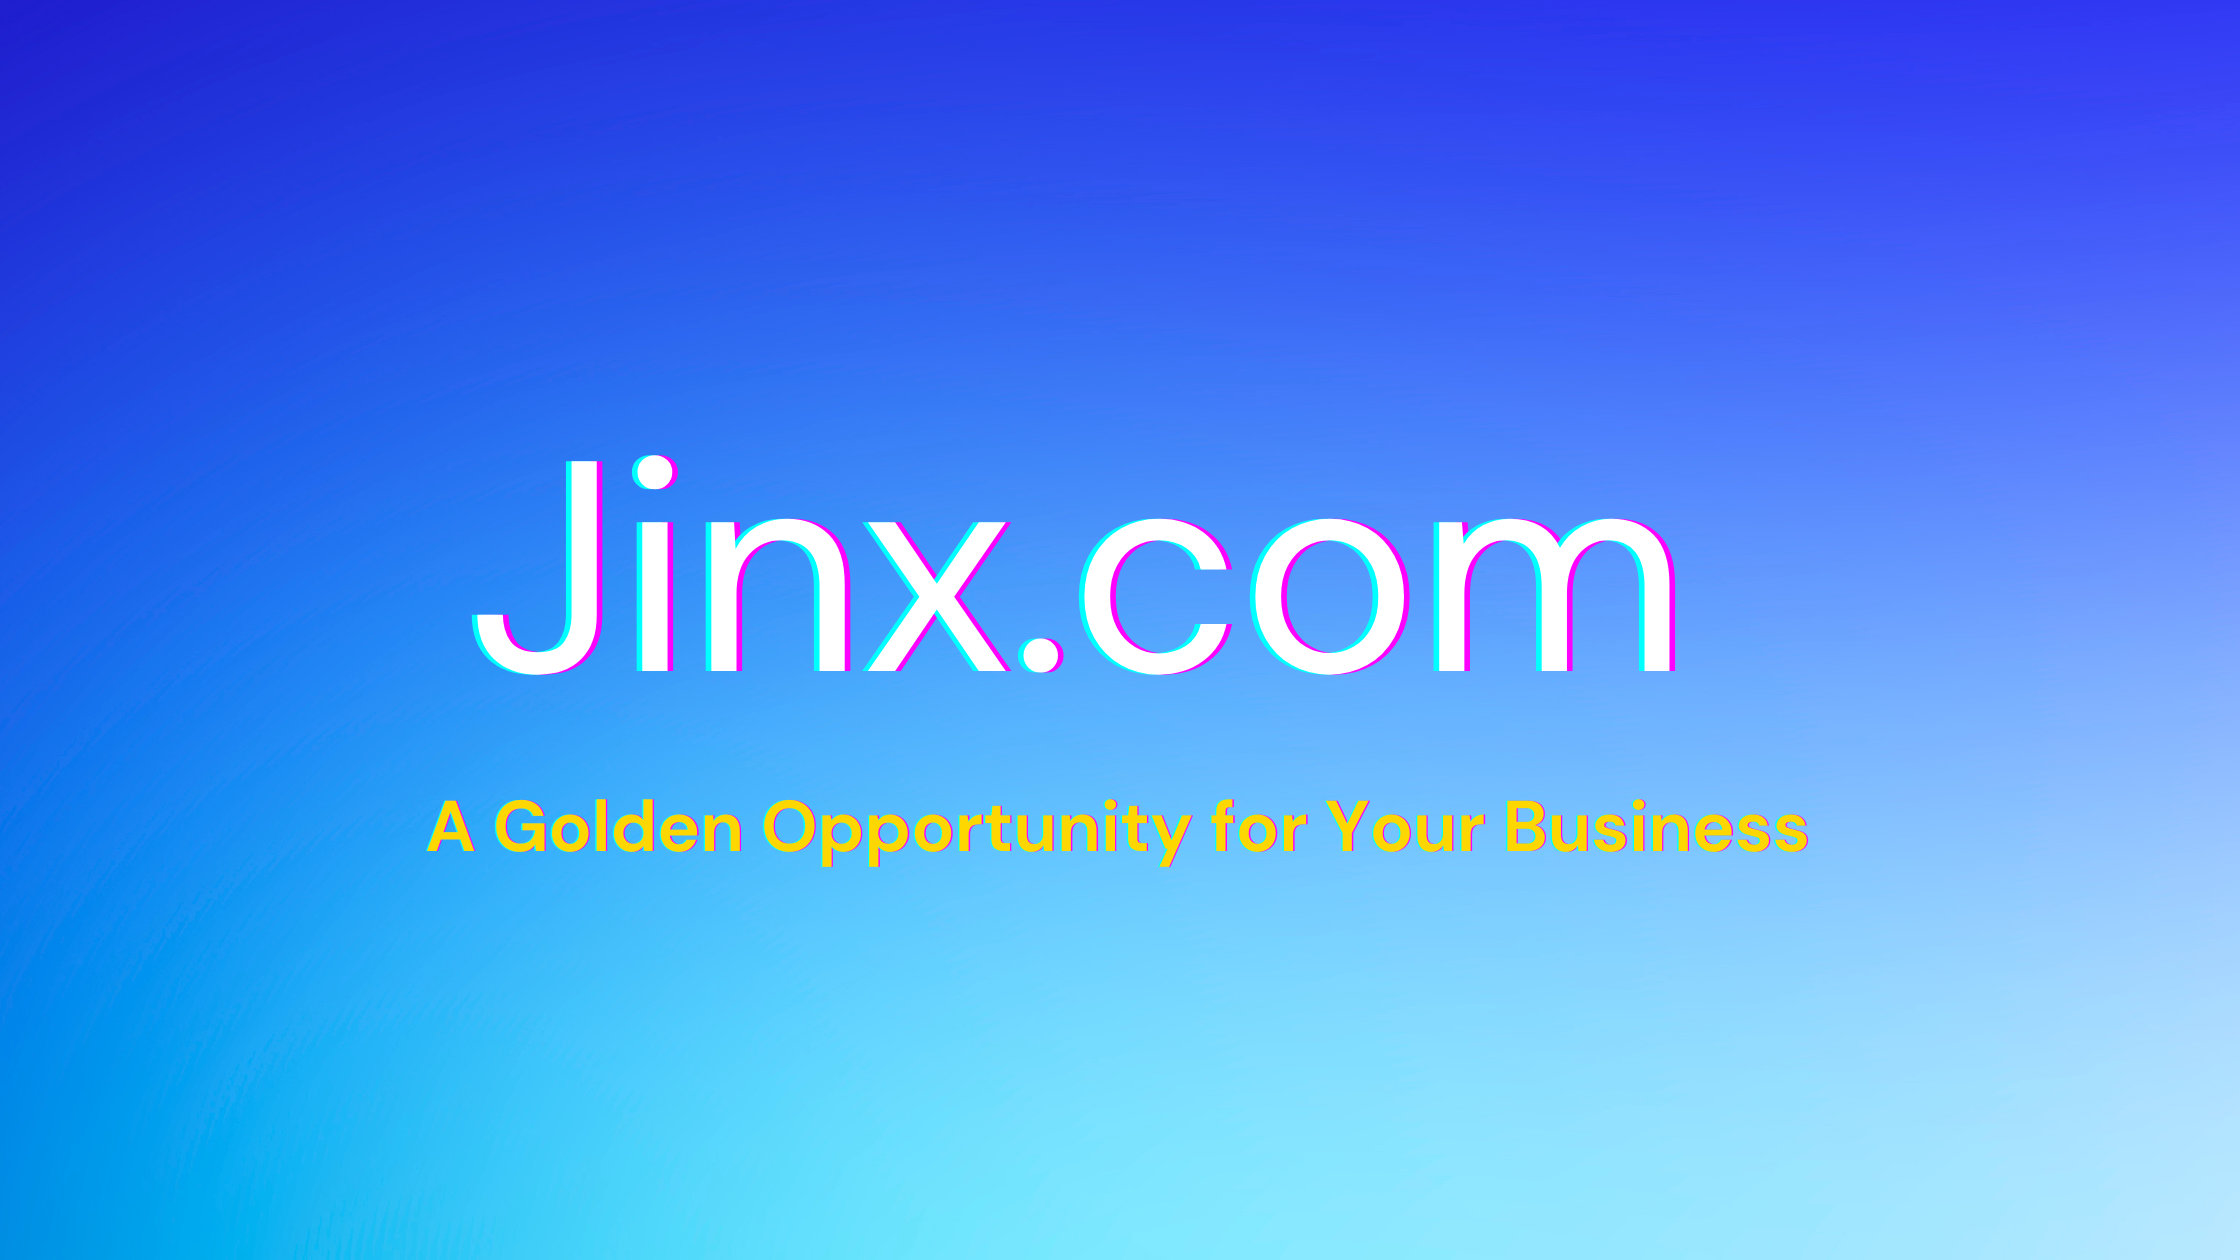 Jinx.com for Sale: A Golden Opportunity for Your Business